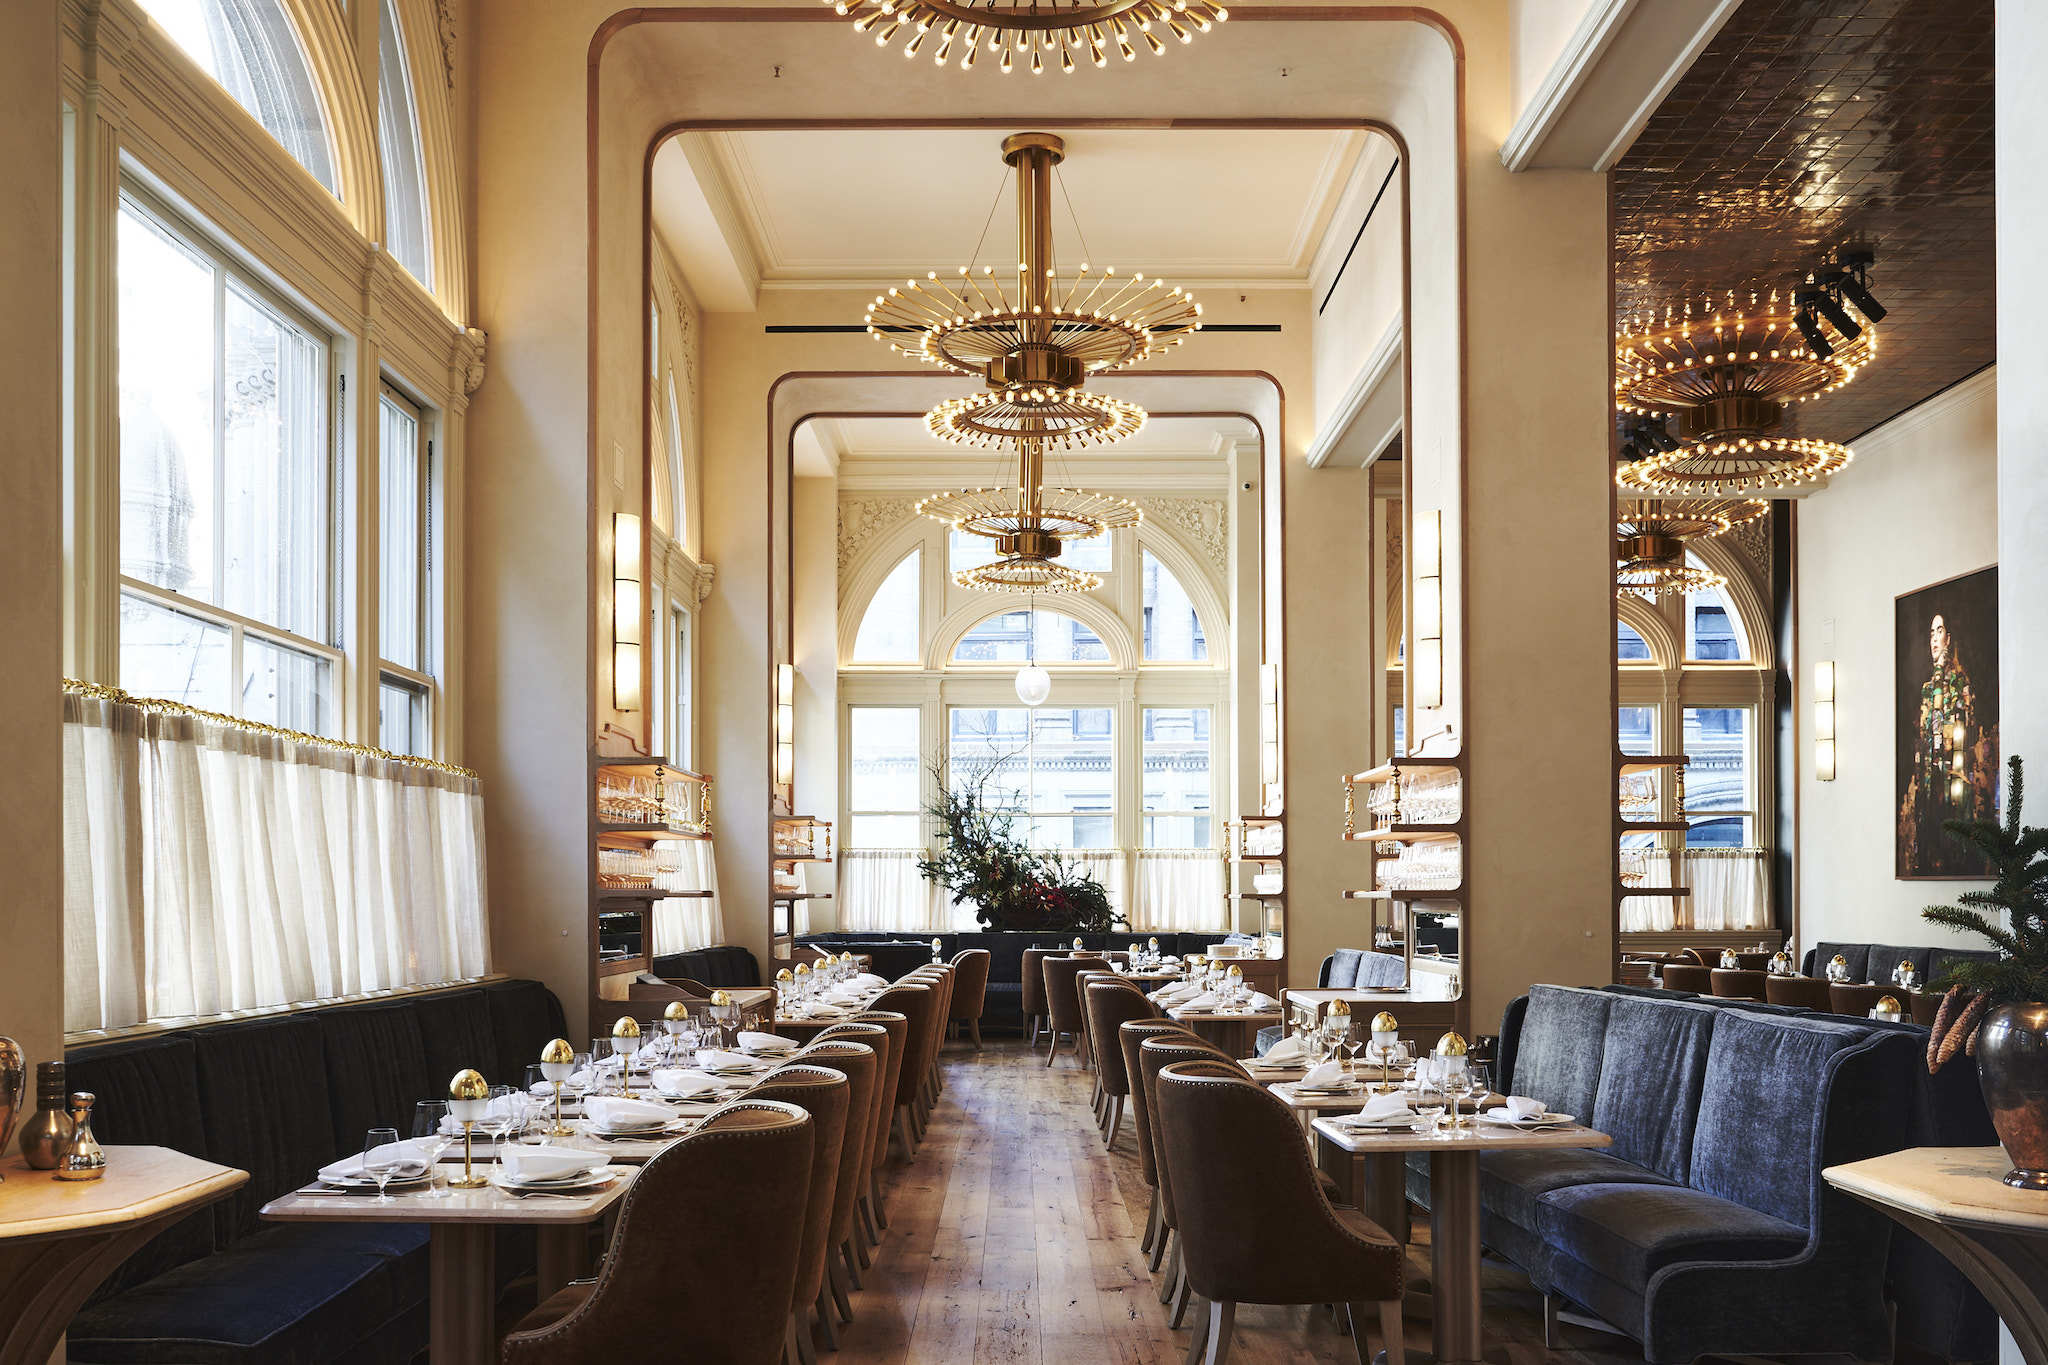 This is apparently the most beautiful restaurant in New York City